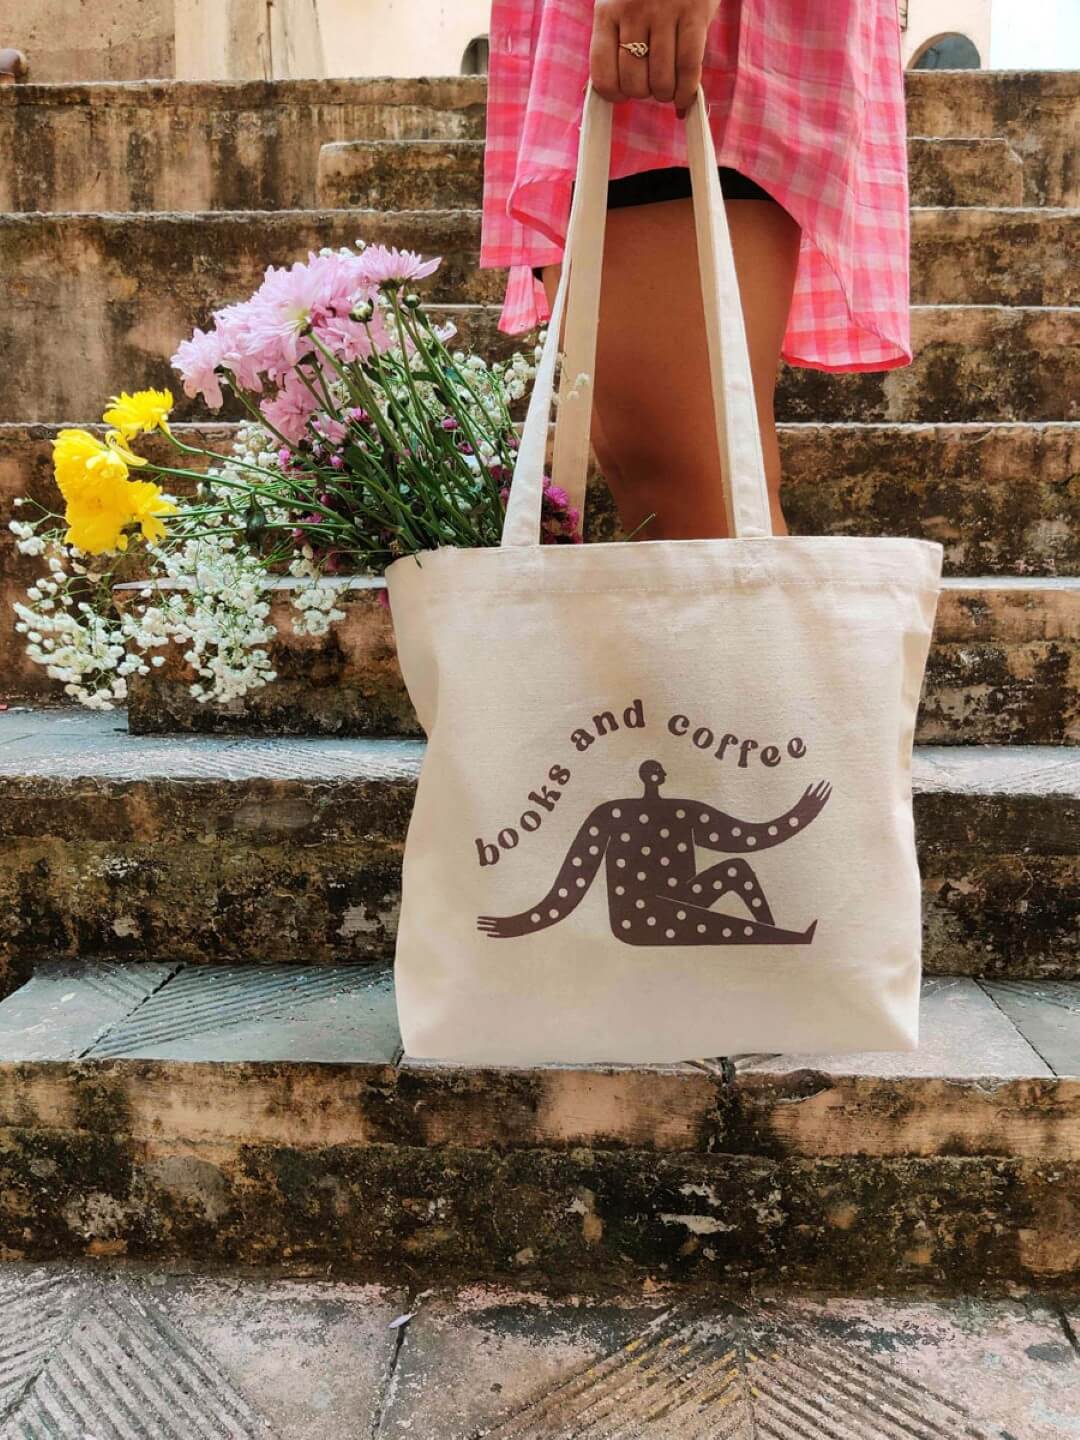 Book and Coffee Canvas Tote Bag